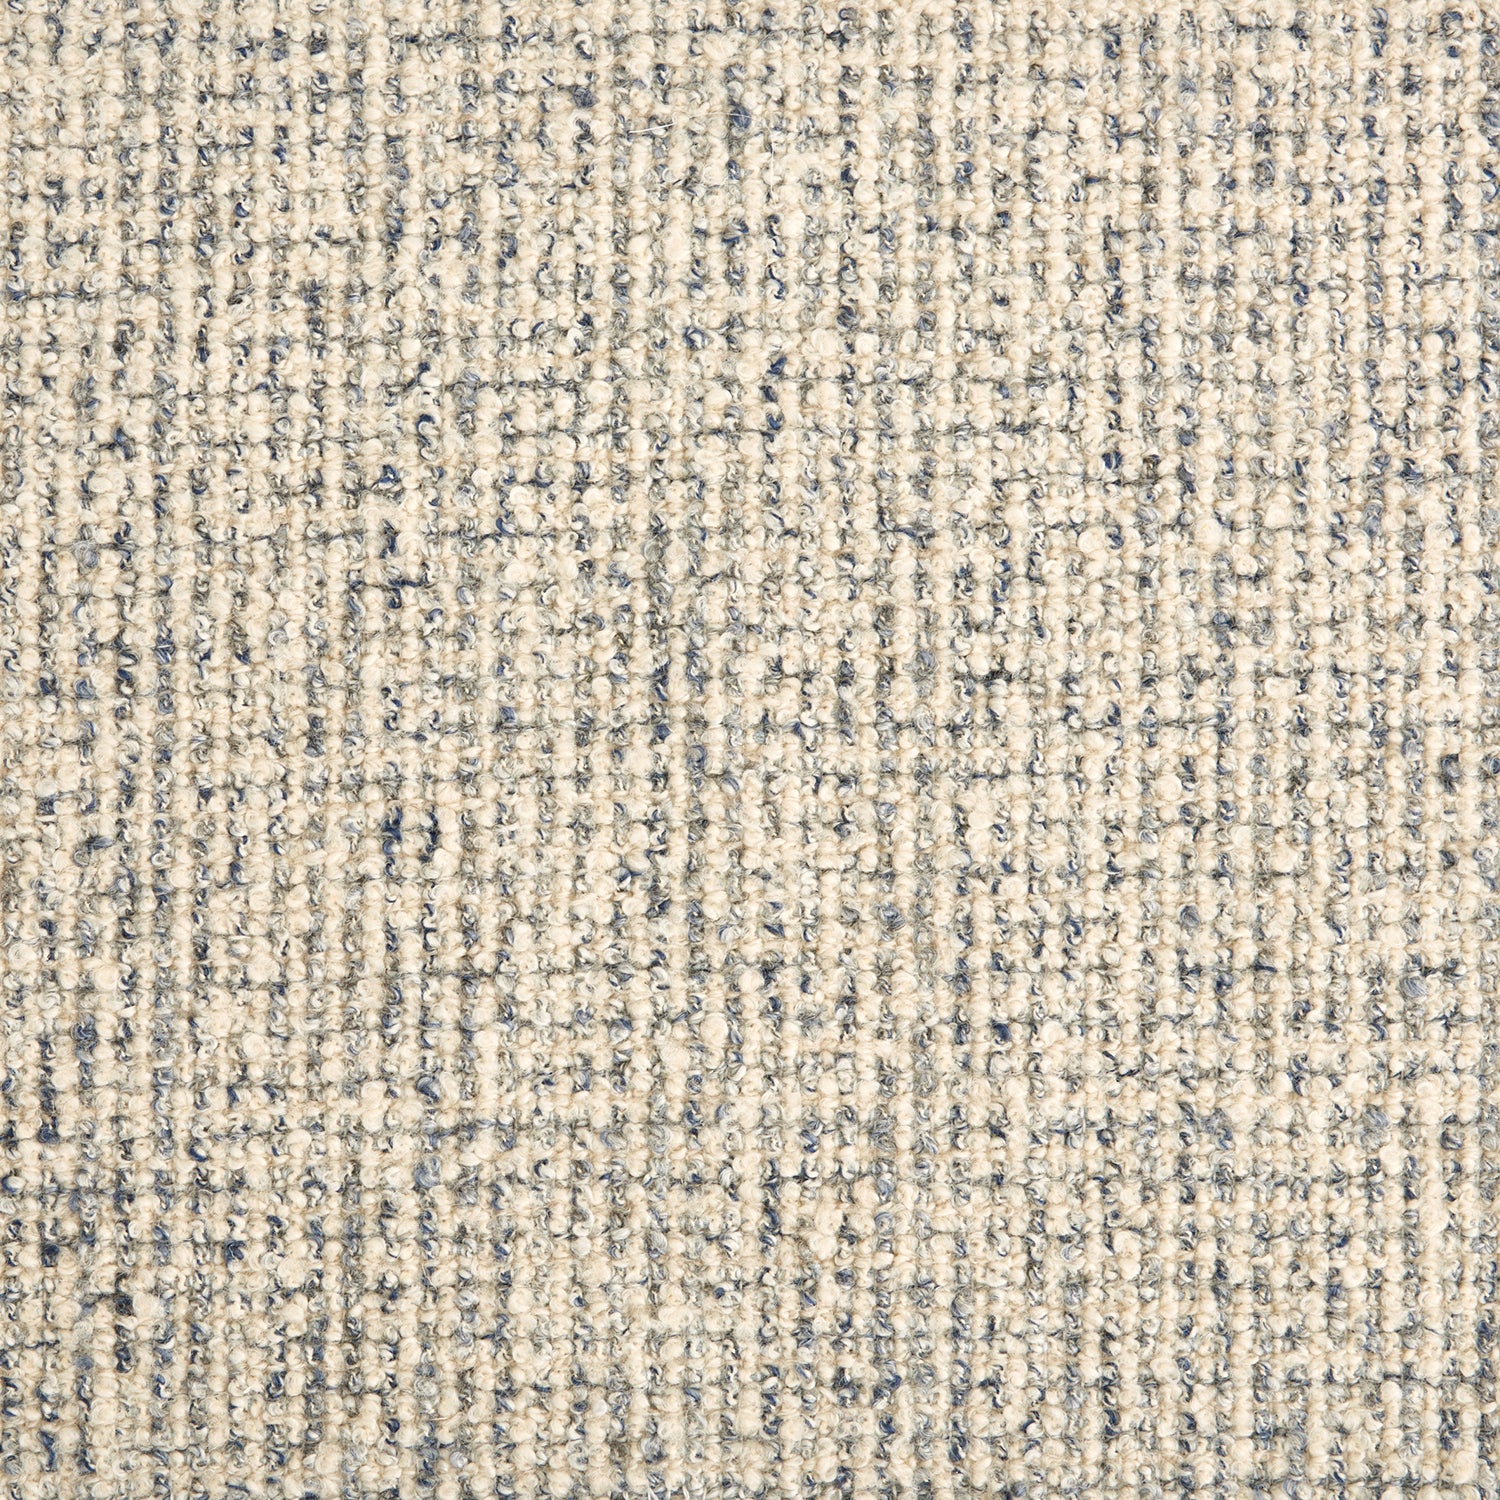 Wool broadloom carpet swatch in a textured high-pile weave in mottled tan and sage.